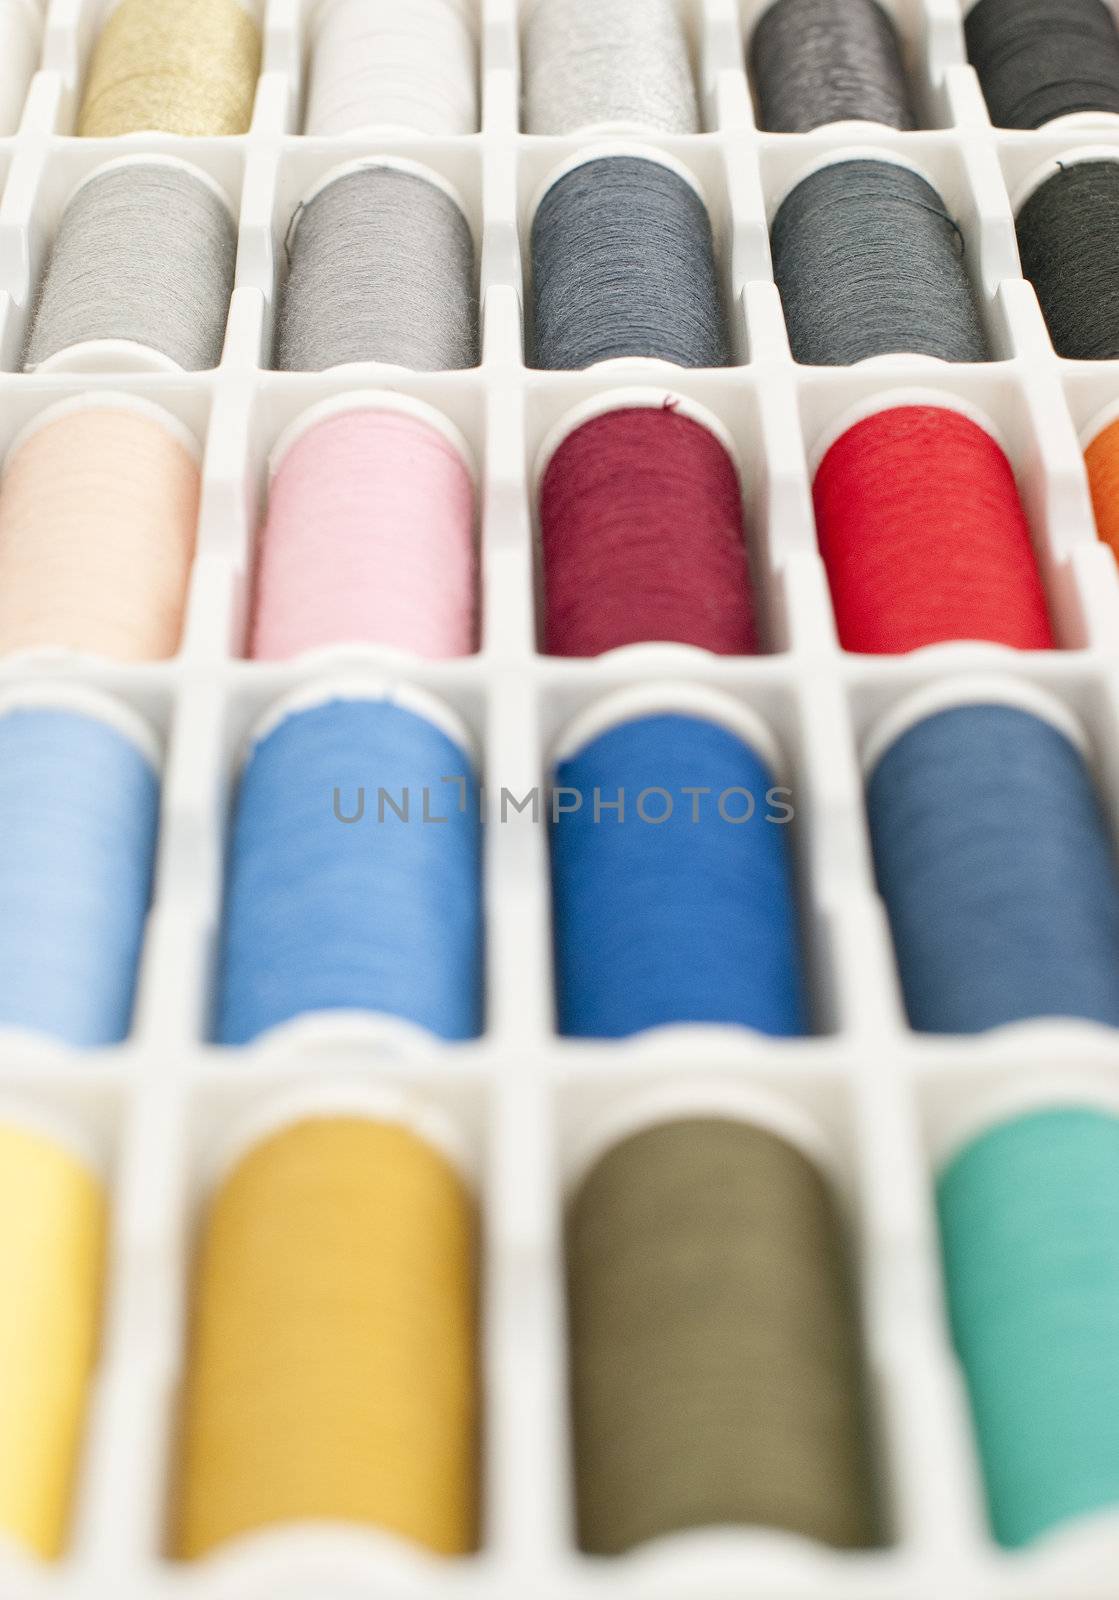 Colorful Spools of sewing thread.